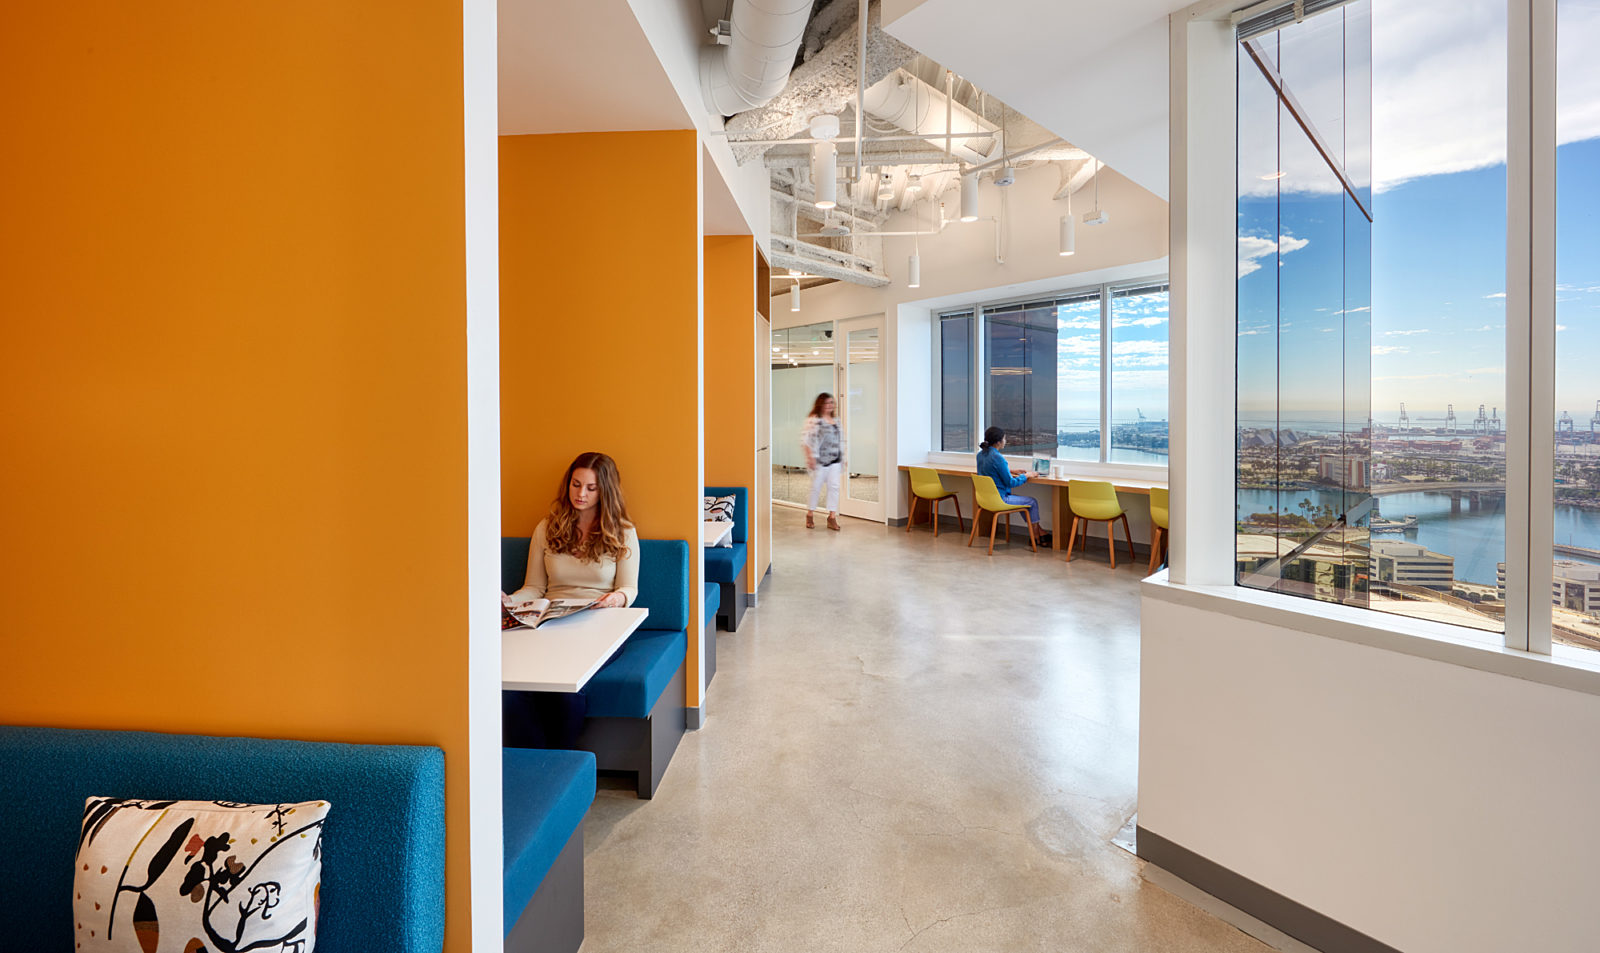 A mixed workspace featuring booths with colorful walls and upholstery and tables that line the wall on the right side overlooking a view of the city.